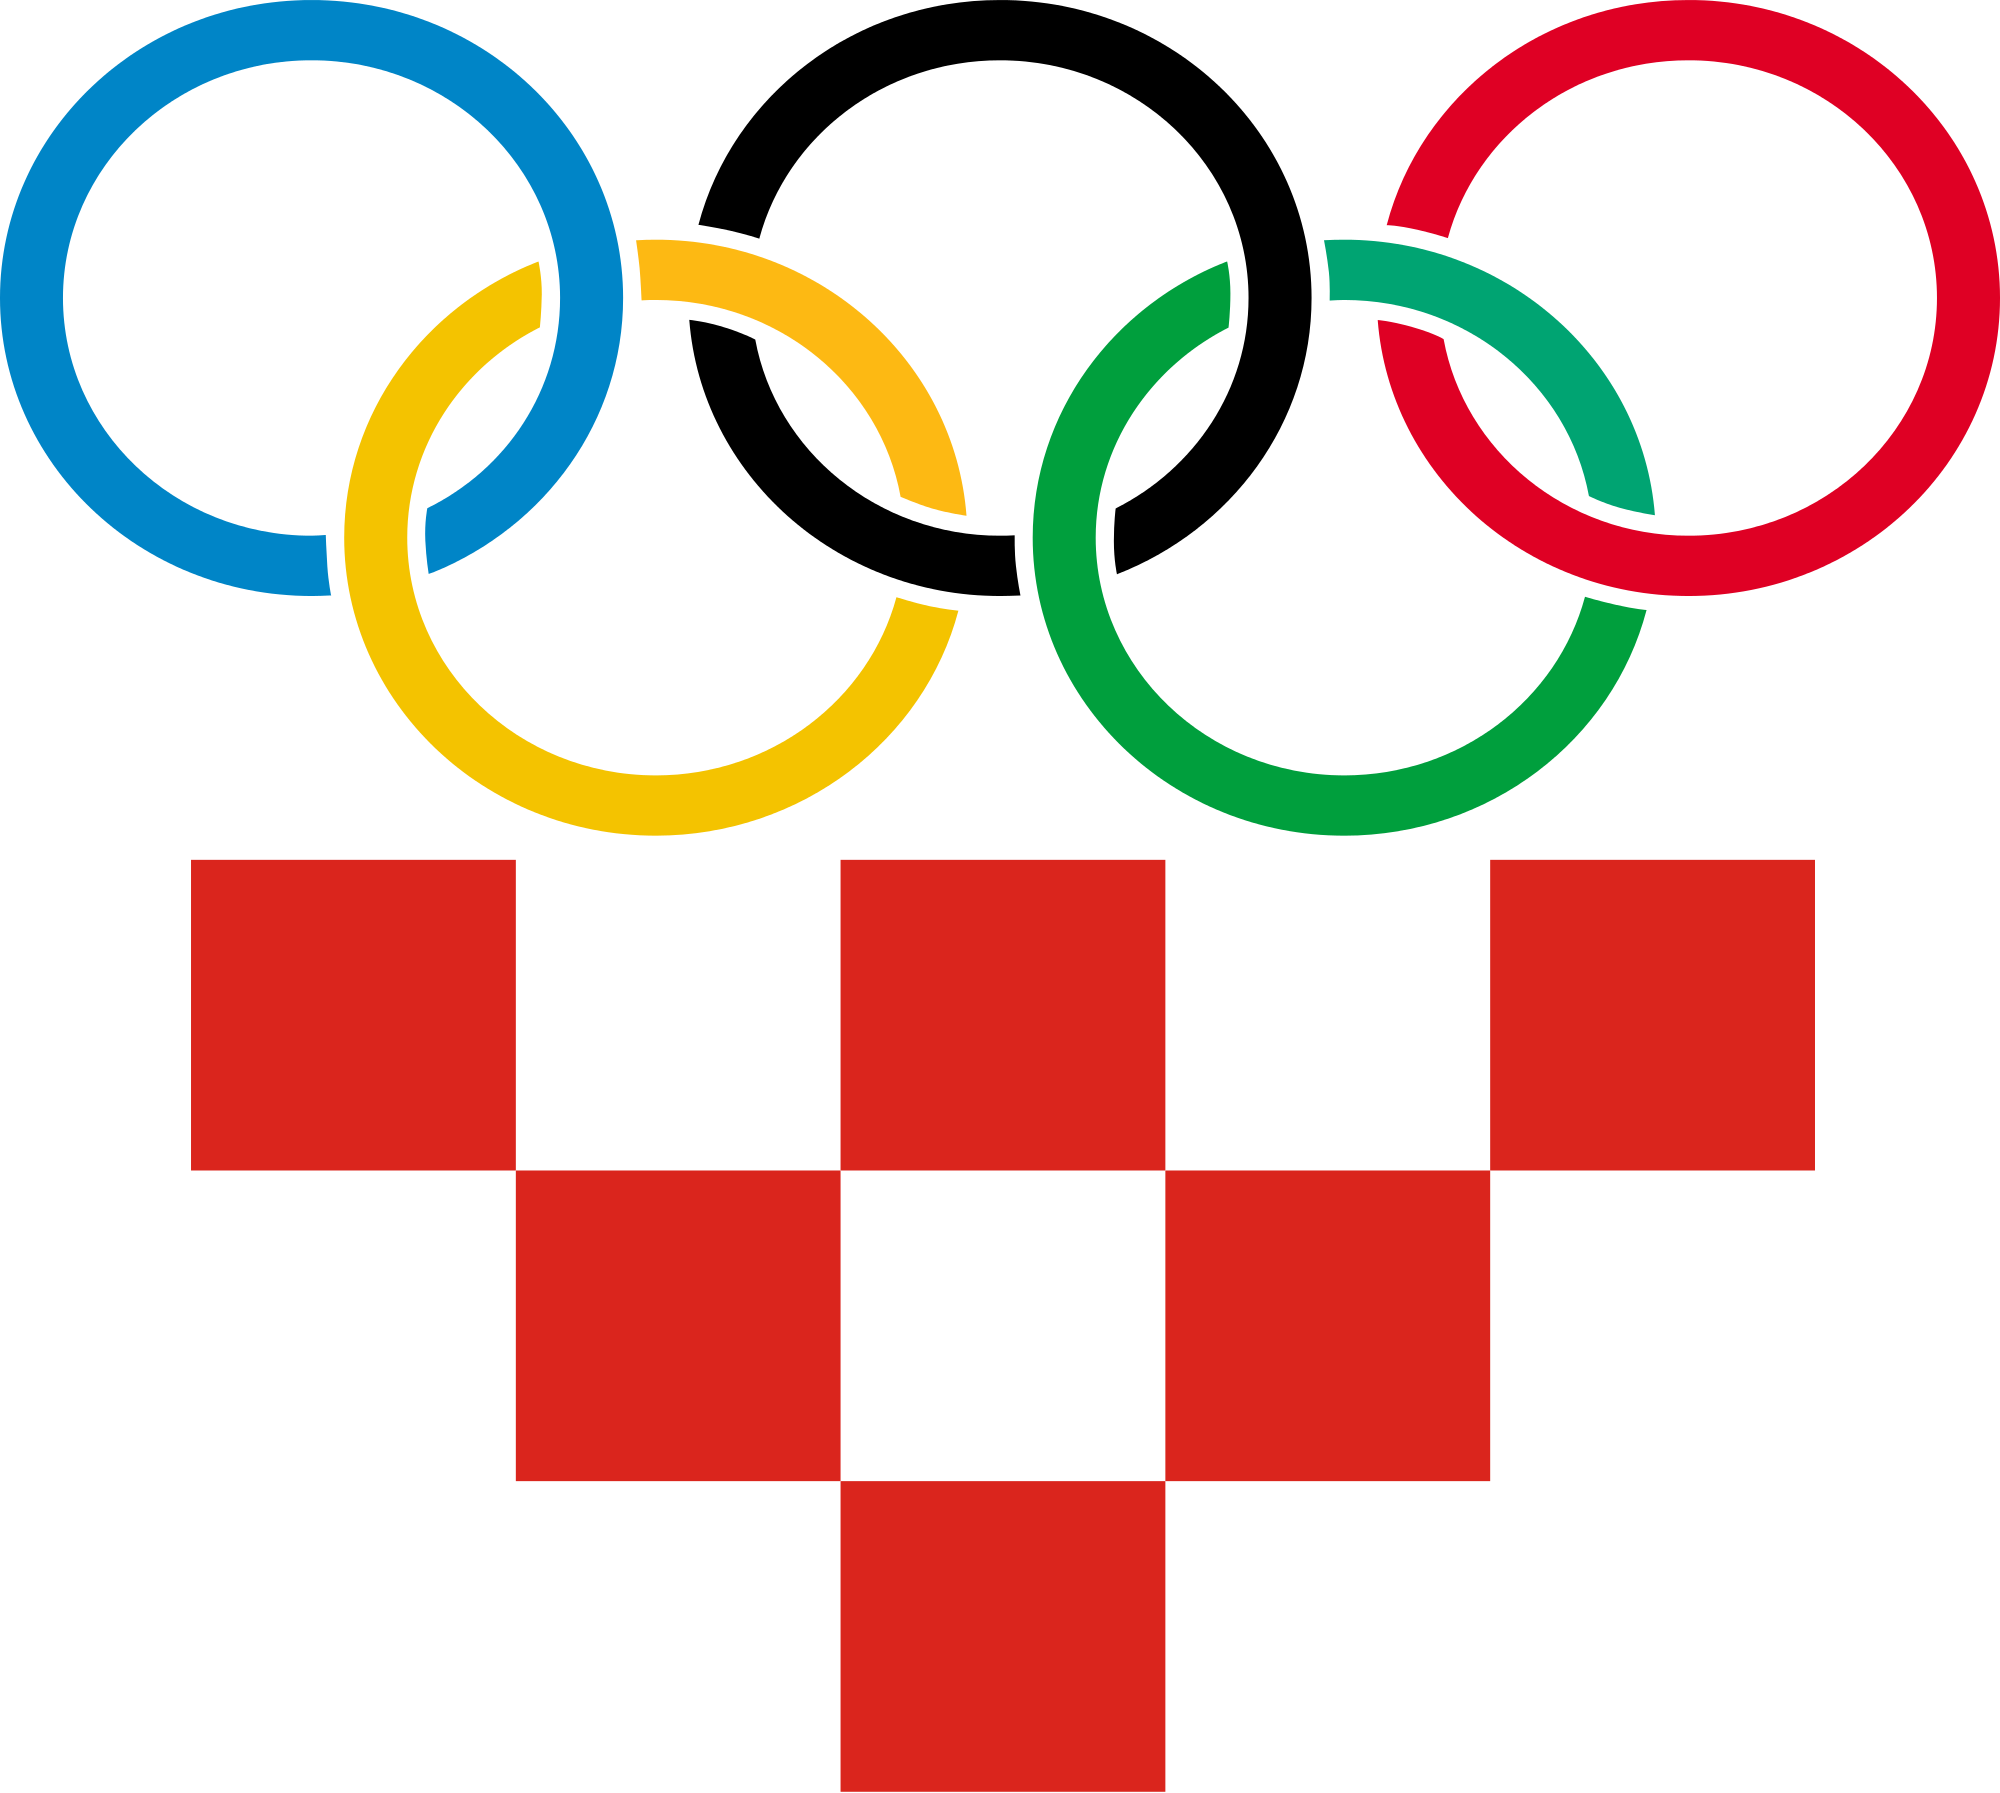 2000px-croatian Olympic Committee Logo - Importance Of Olympics Games (2000x1793)